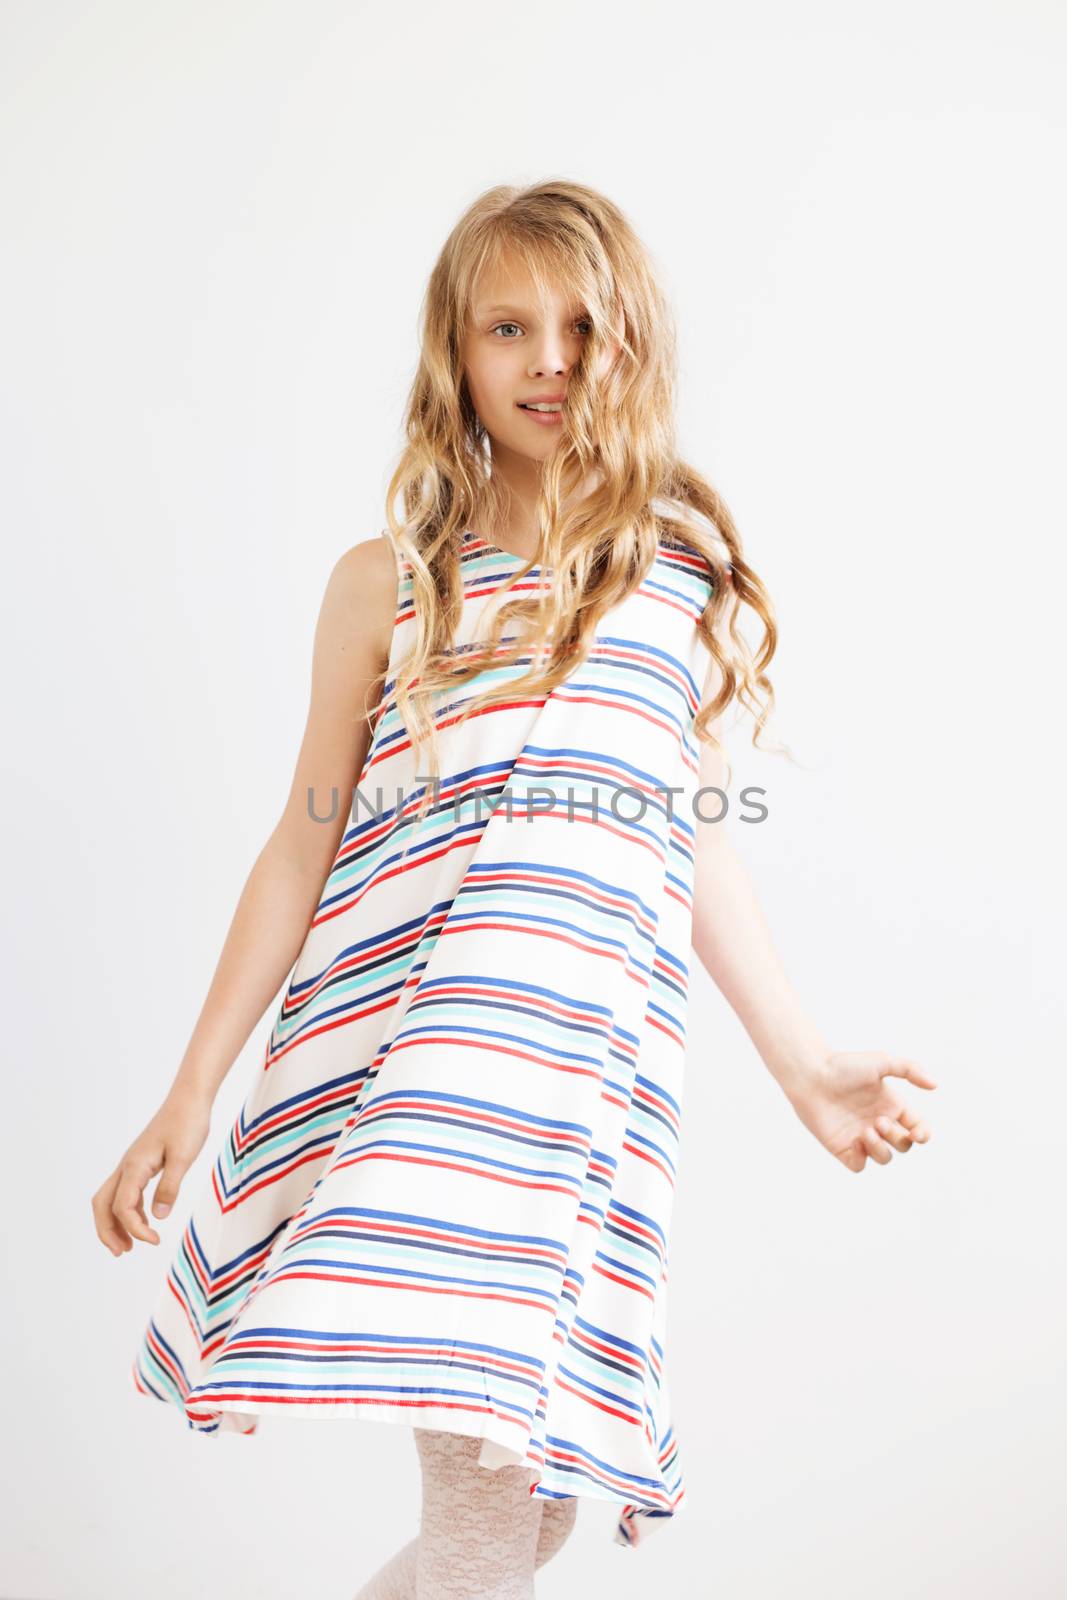 Lovely little girl in a striped dress against a white background. Happy kids